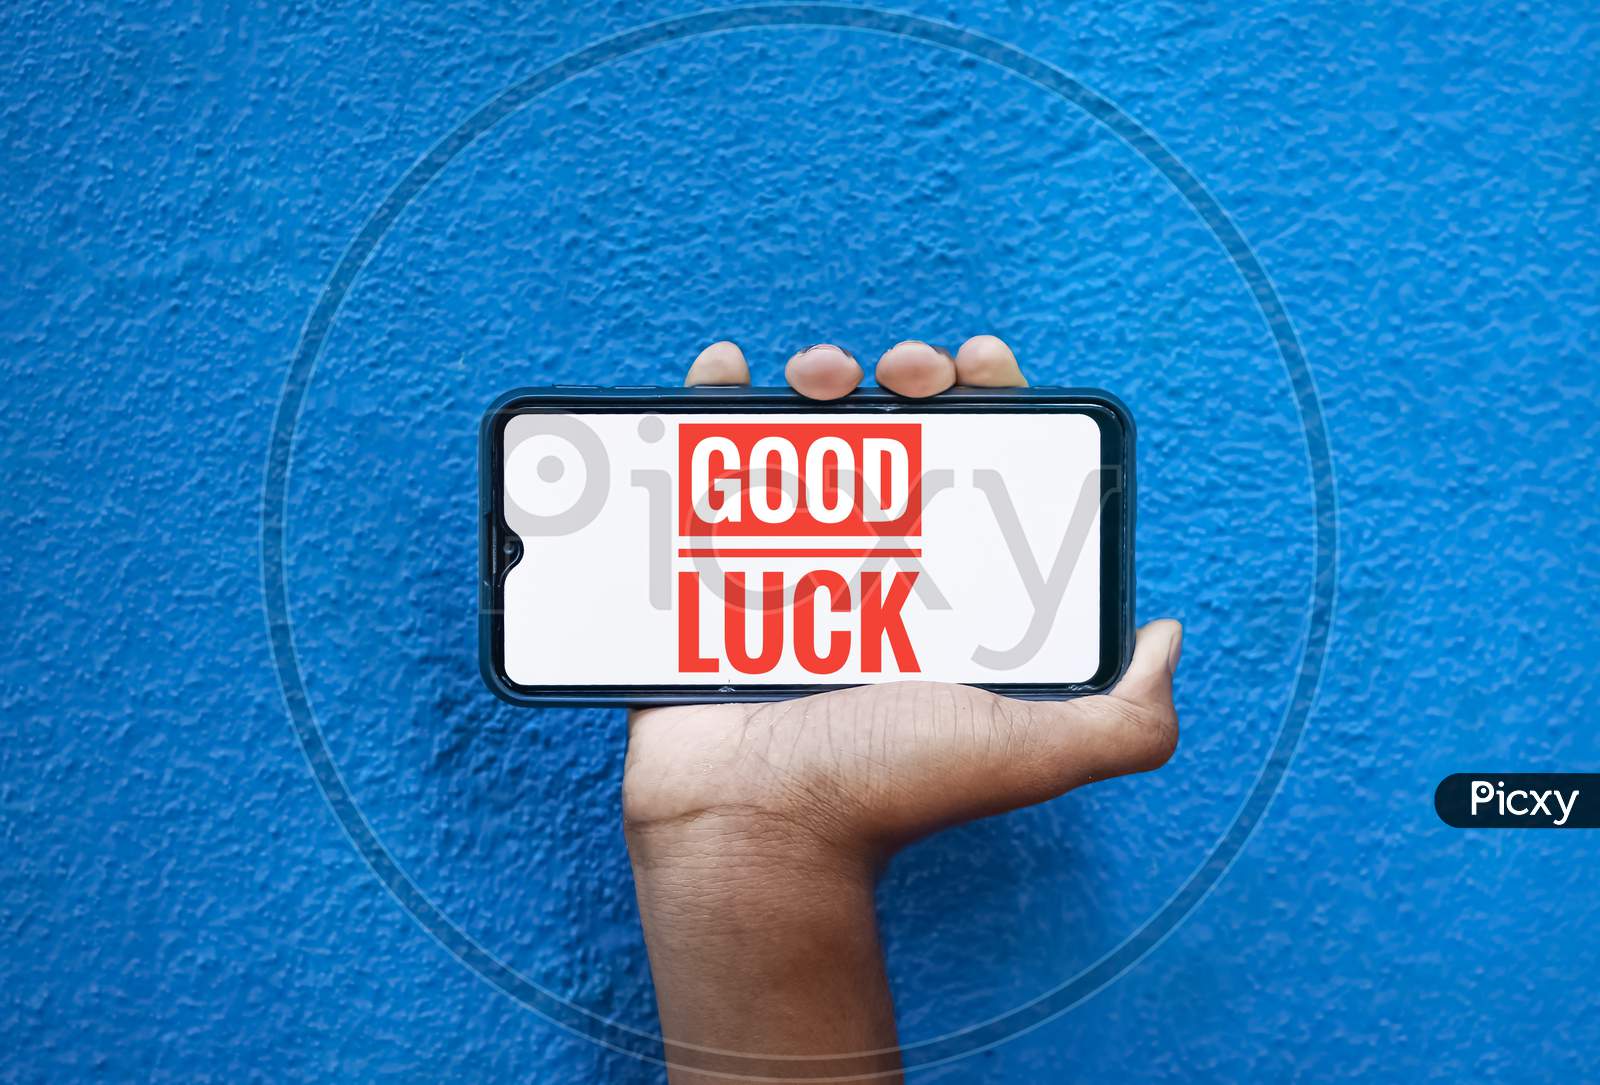 Good Luck Wording On Smart Phone Screen Isolated On Blue Background With Copy Space For Text. Person Holding Mobile On His Hand And Showing Front Of The Screen Word Good Luck